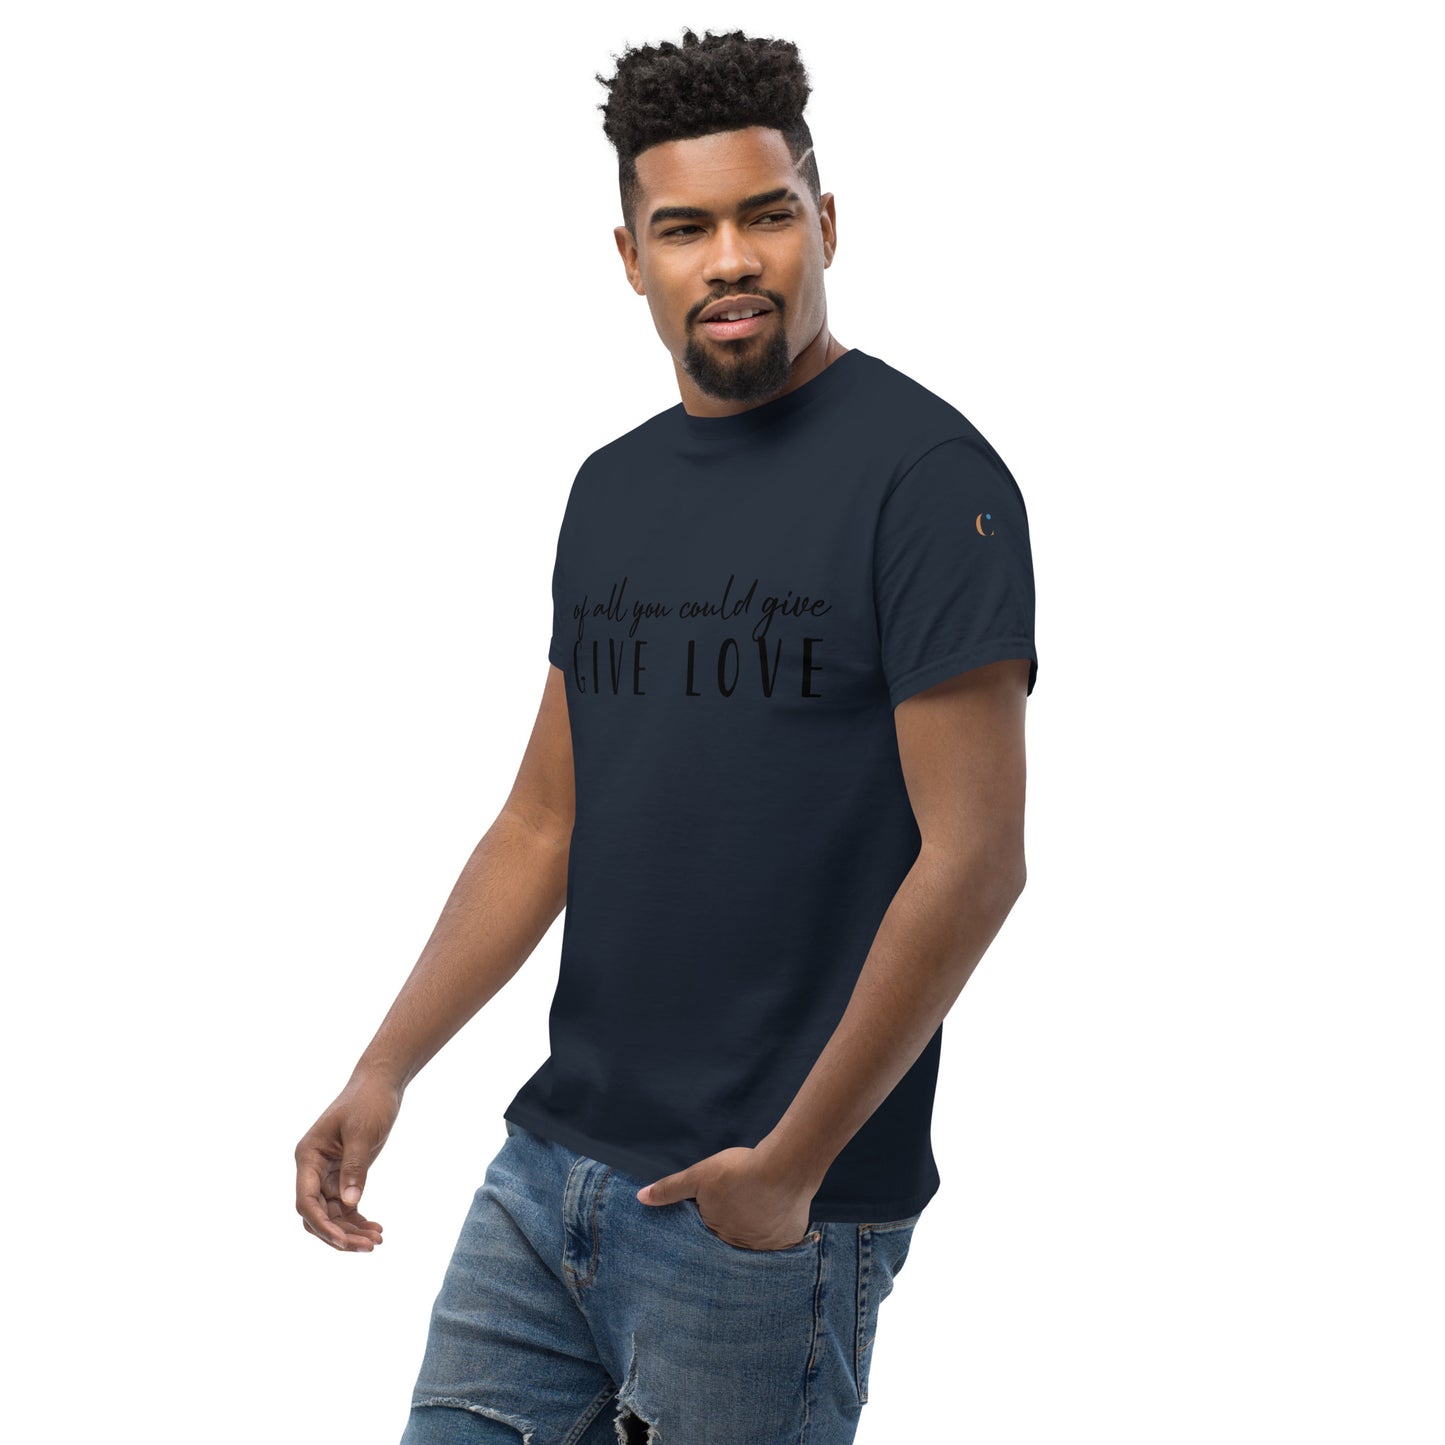 "Give Love" Men's classic tee